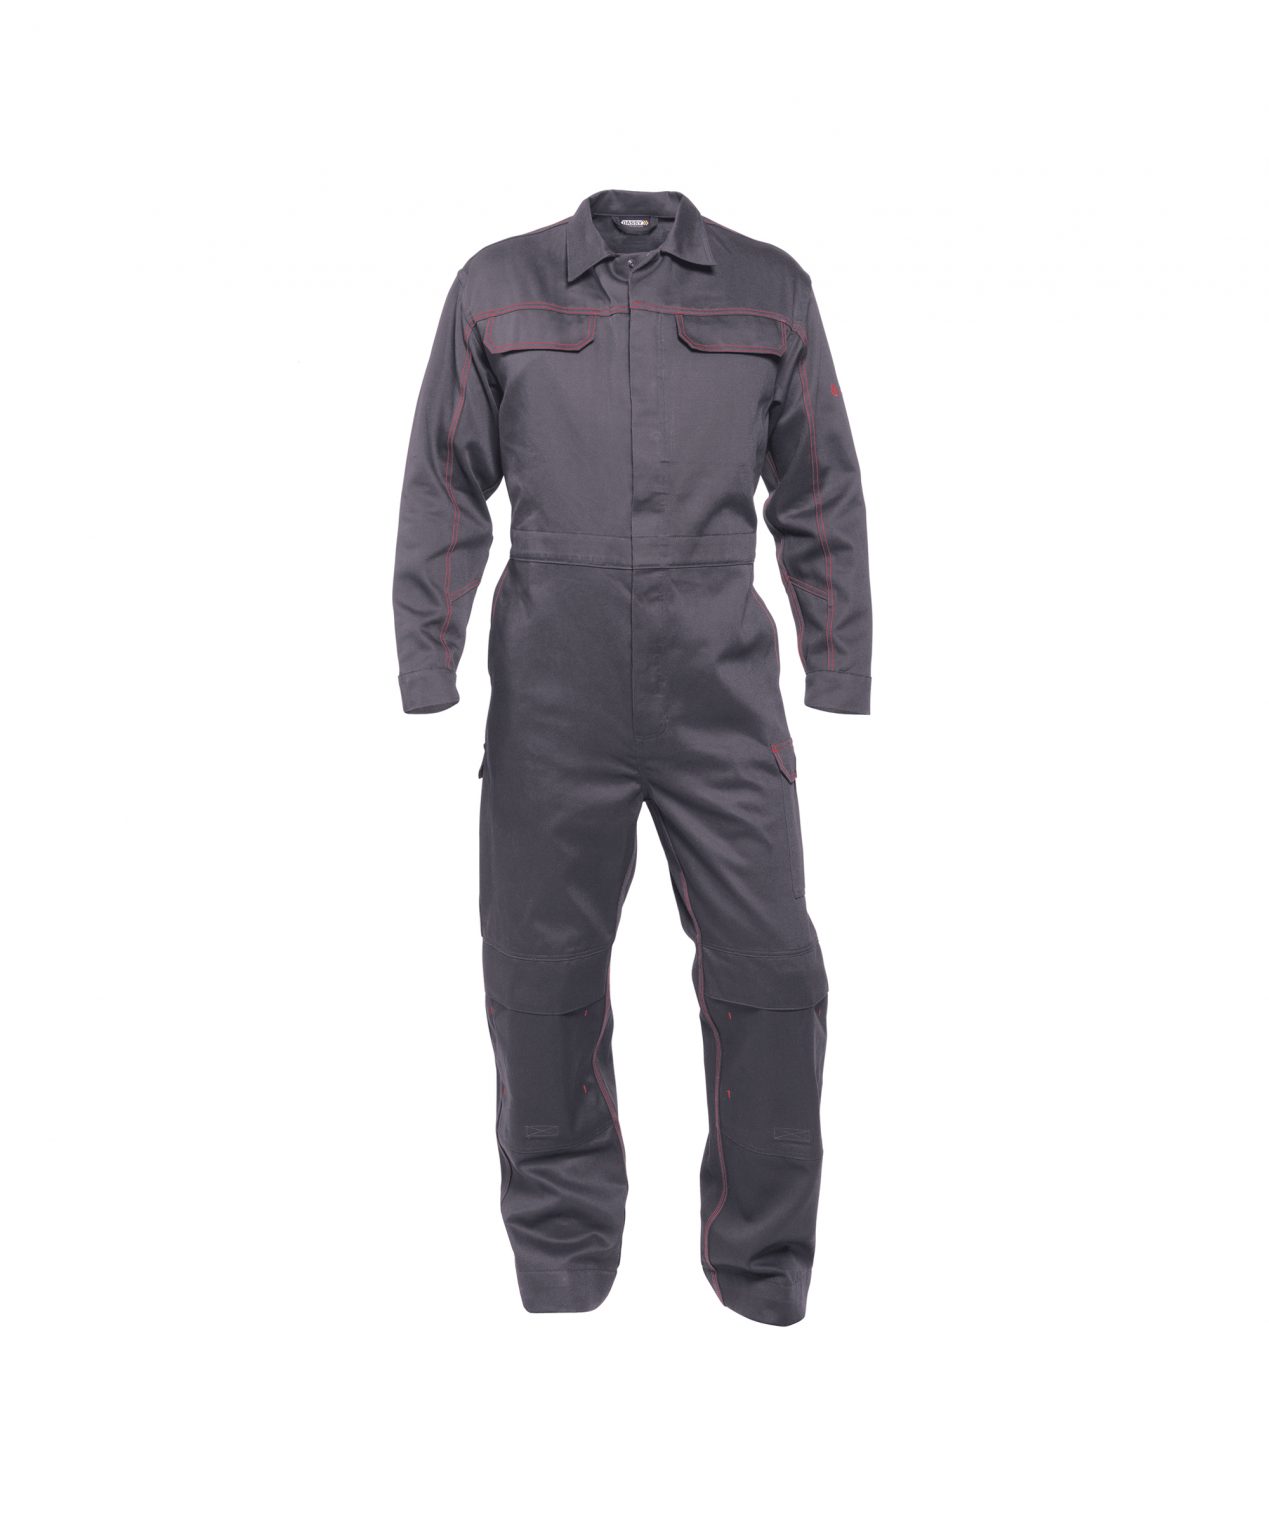 toronto flame retardant overall with knee pockets cement grey front